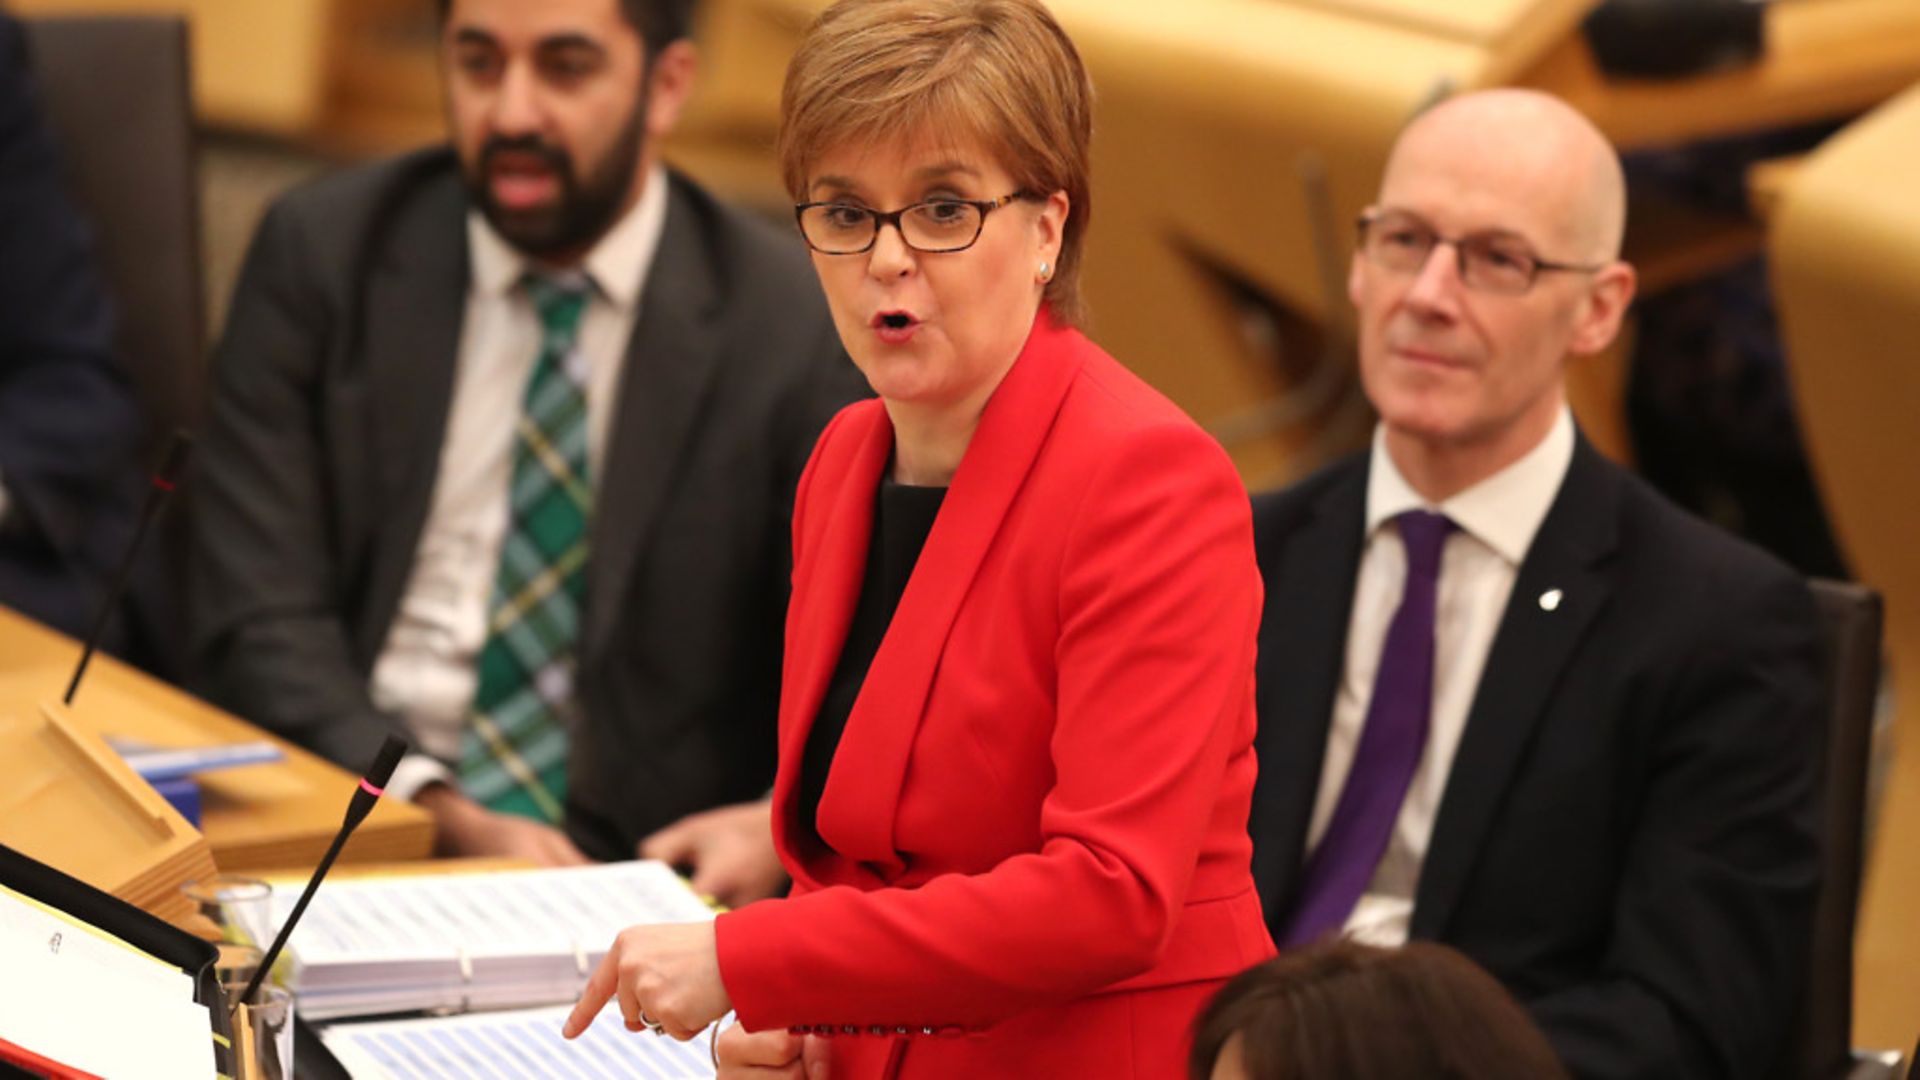 First Minister Nicola Sturgeon during First Minister's Questions at the Scottish Parliament in Edinburgh - Credit: PA Wire/PA Images